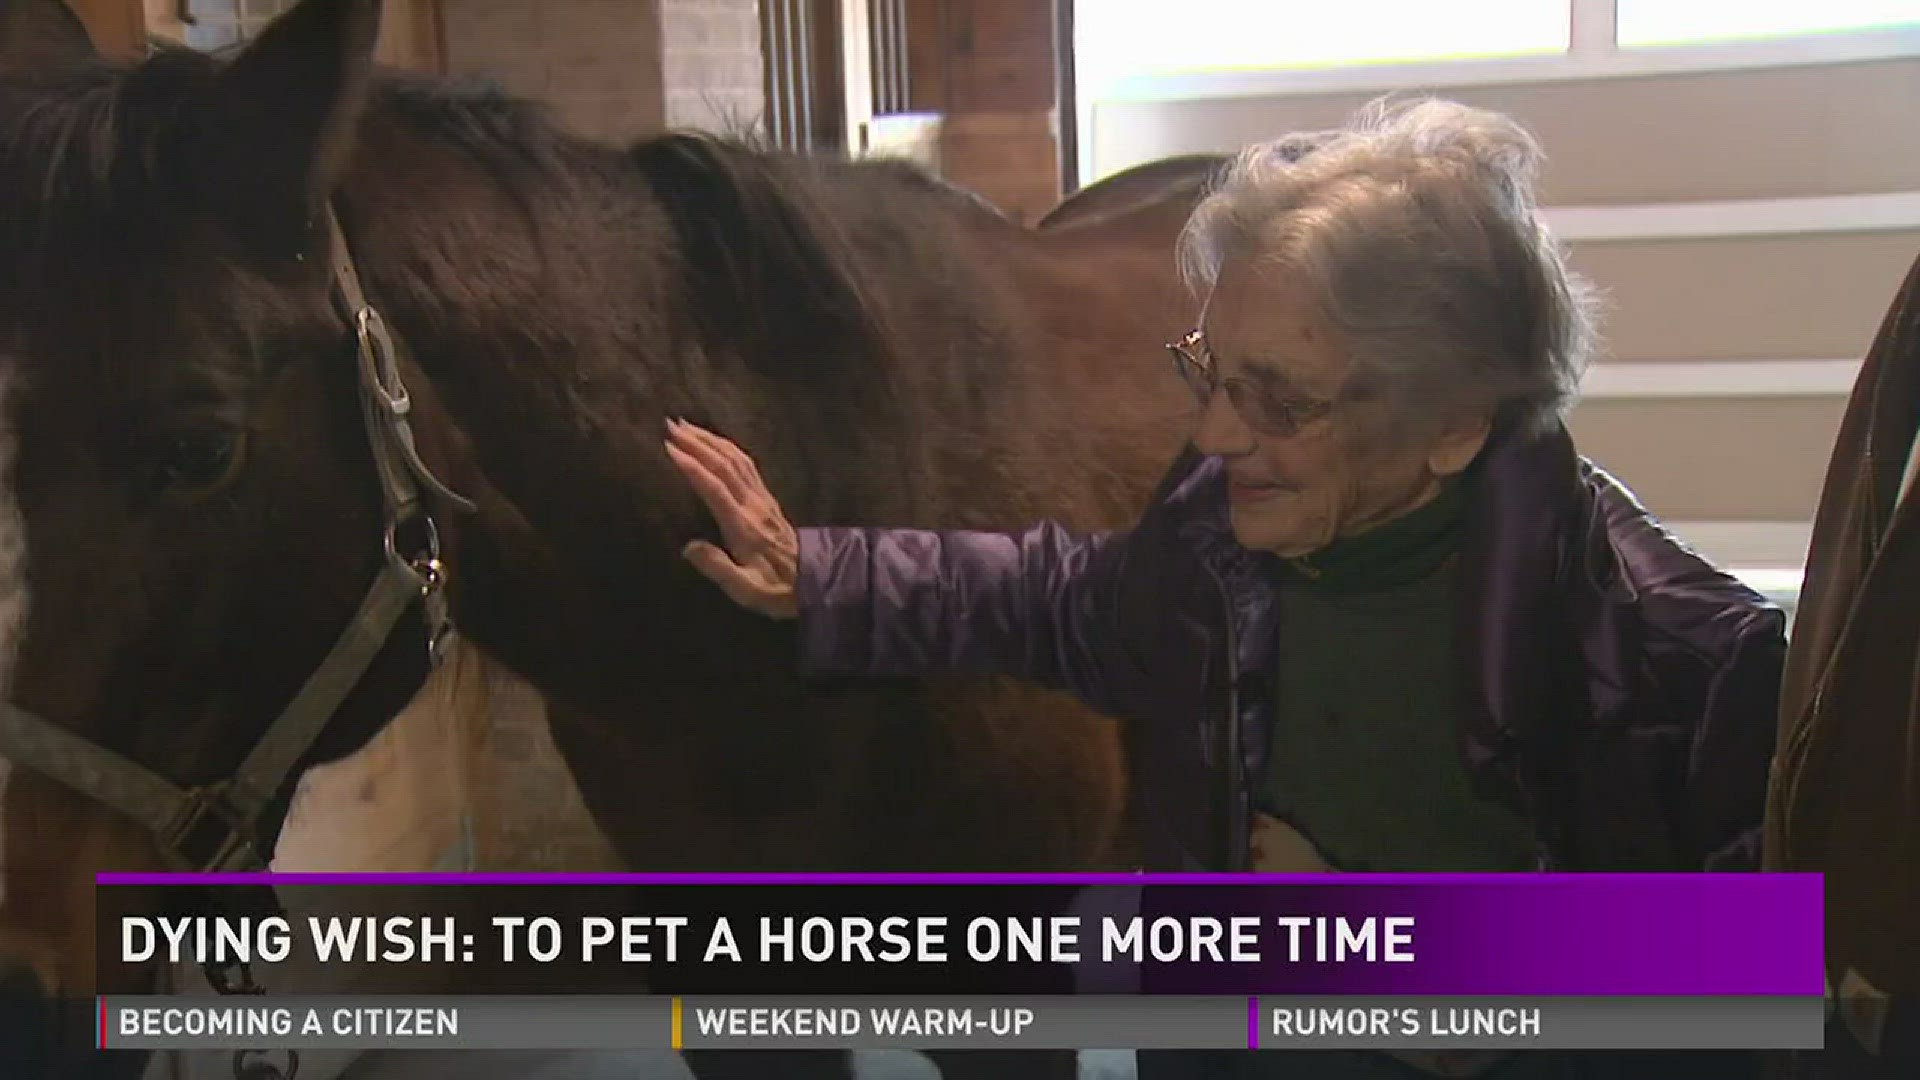 Dying wish: To pet a horse one more time